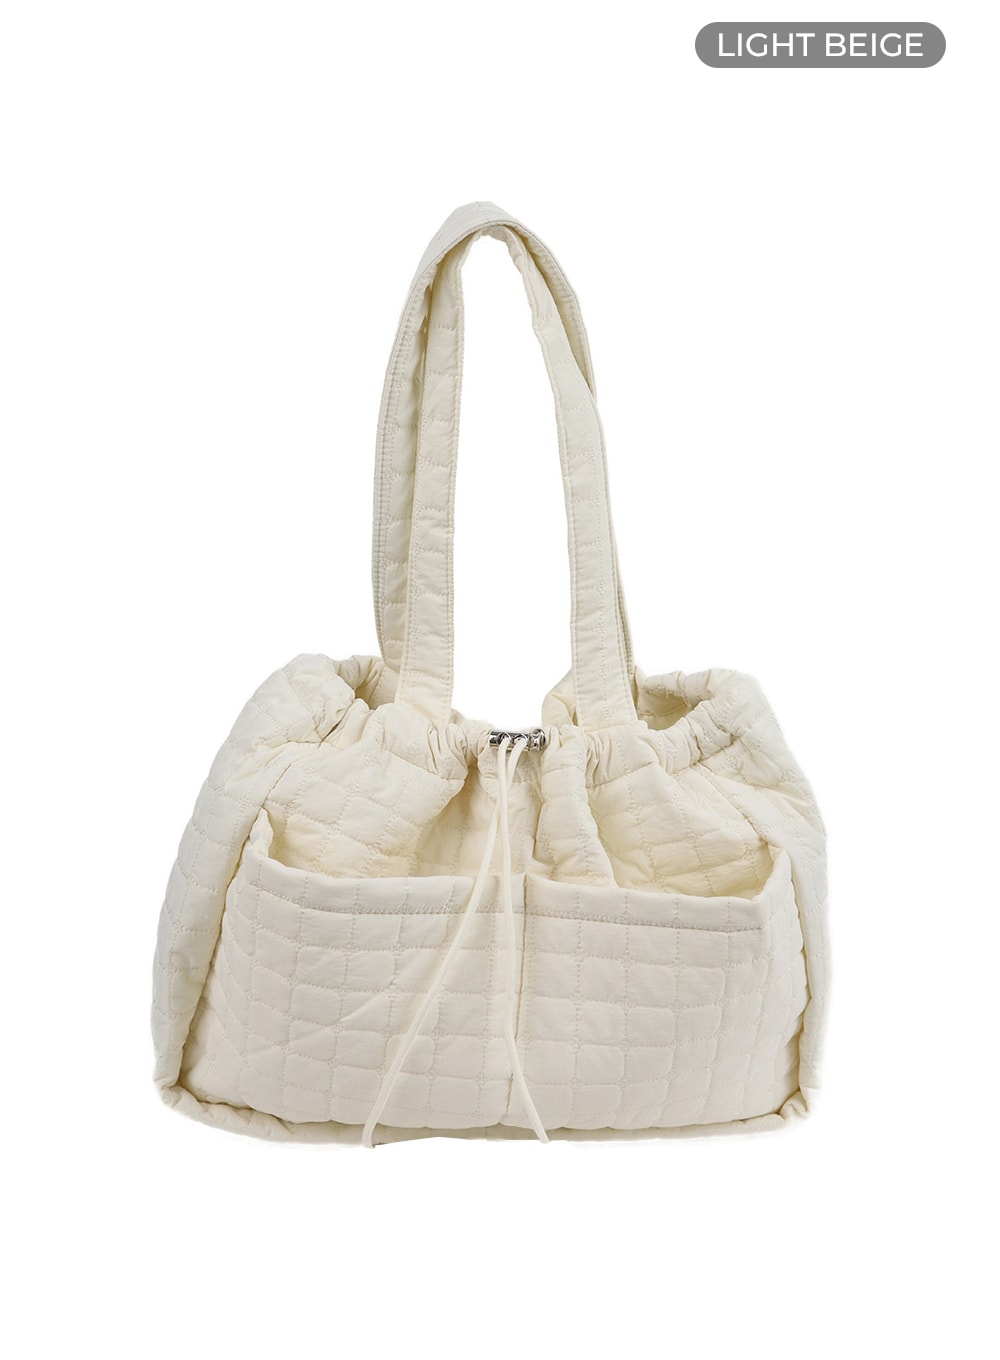 quilted-string-tote-bag-if423 / Light beige